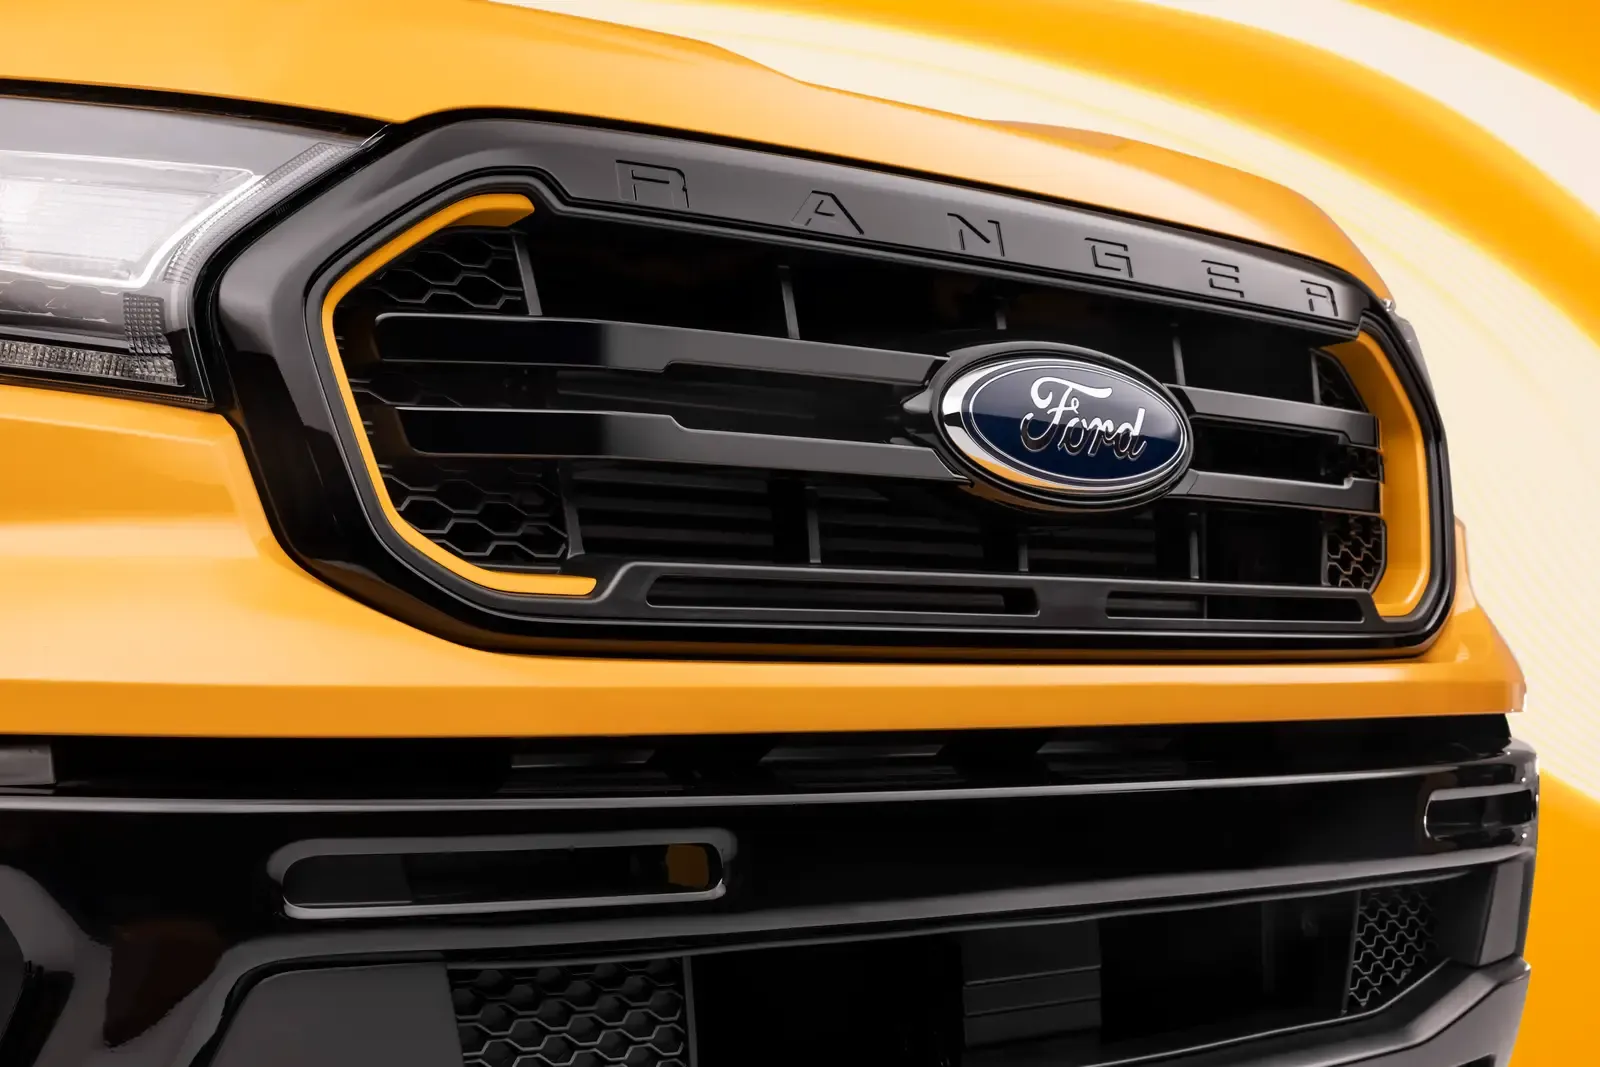 The New Ford Ranger Splash Limited Edition